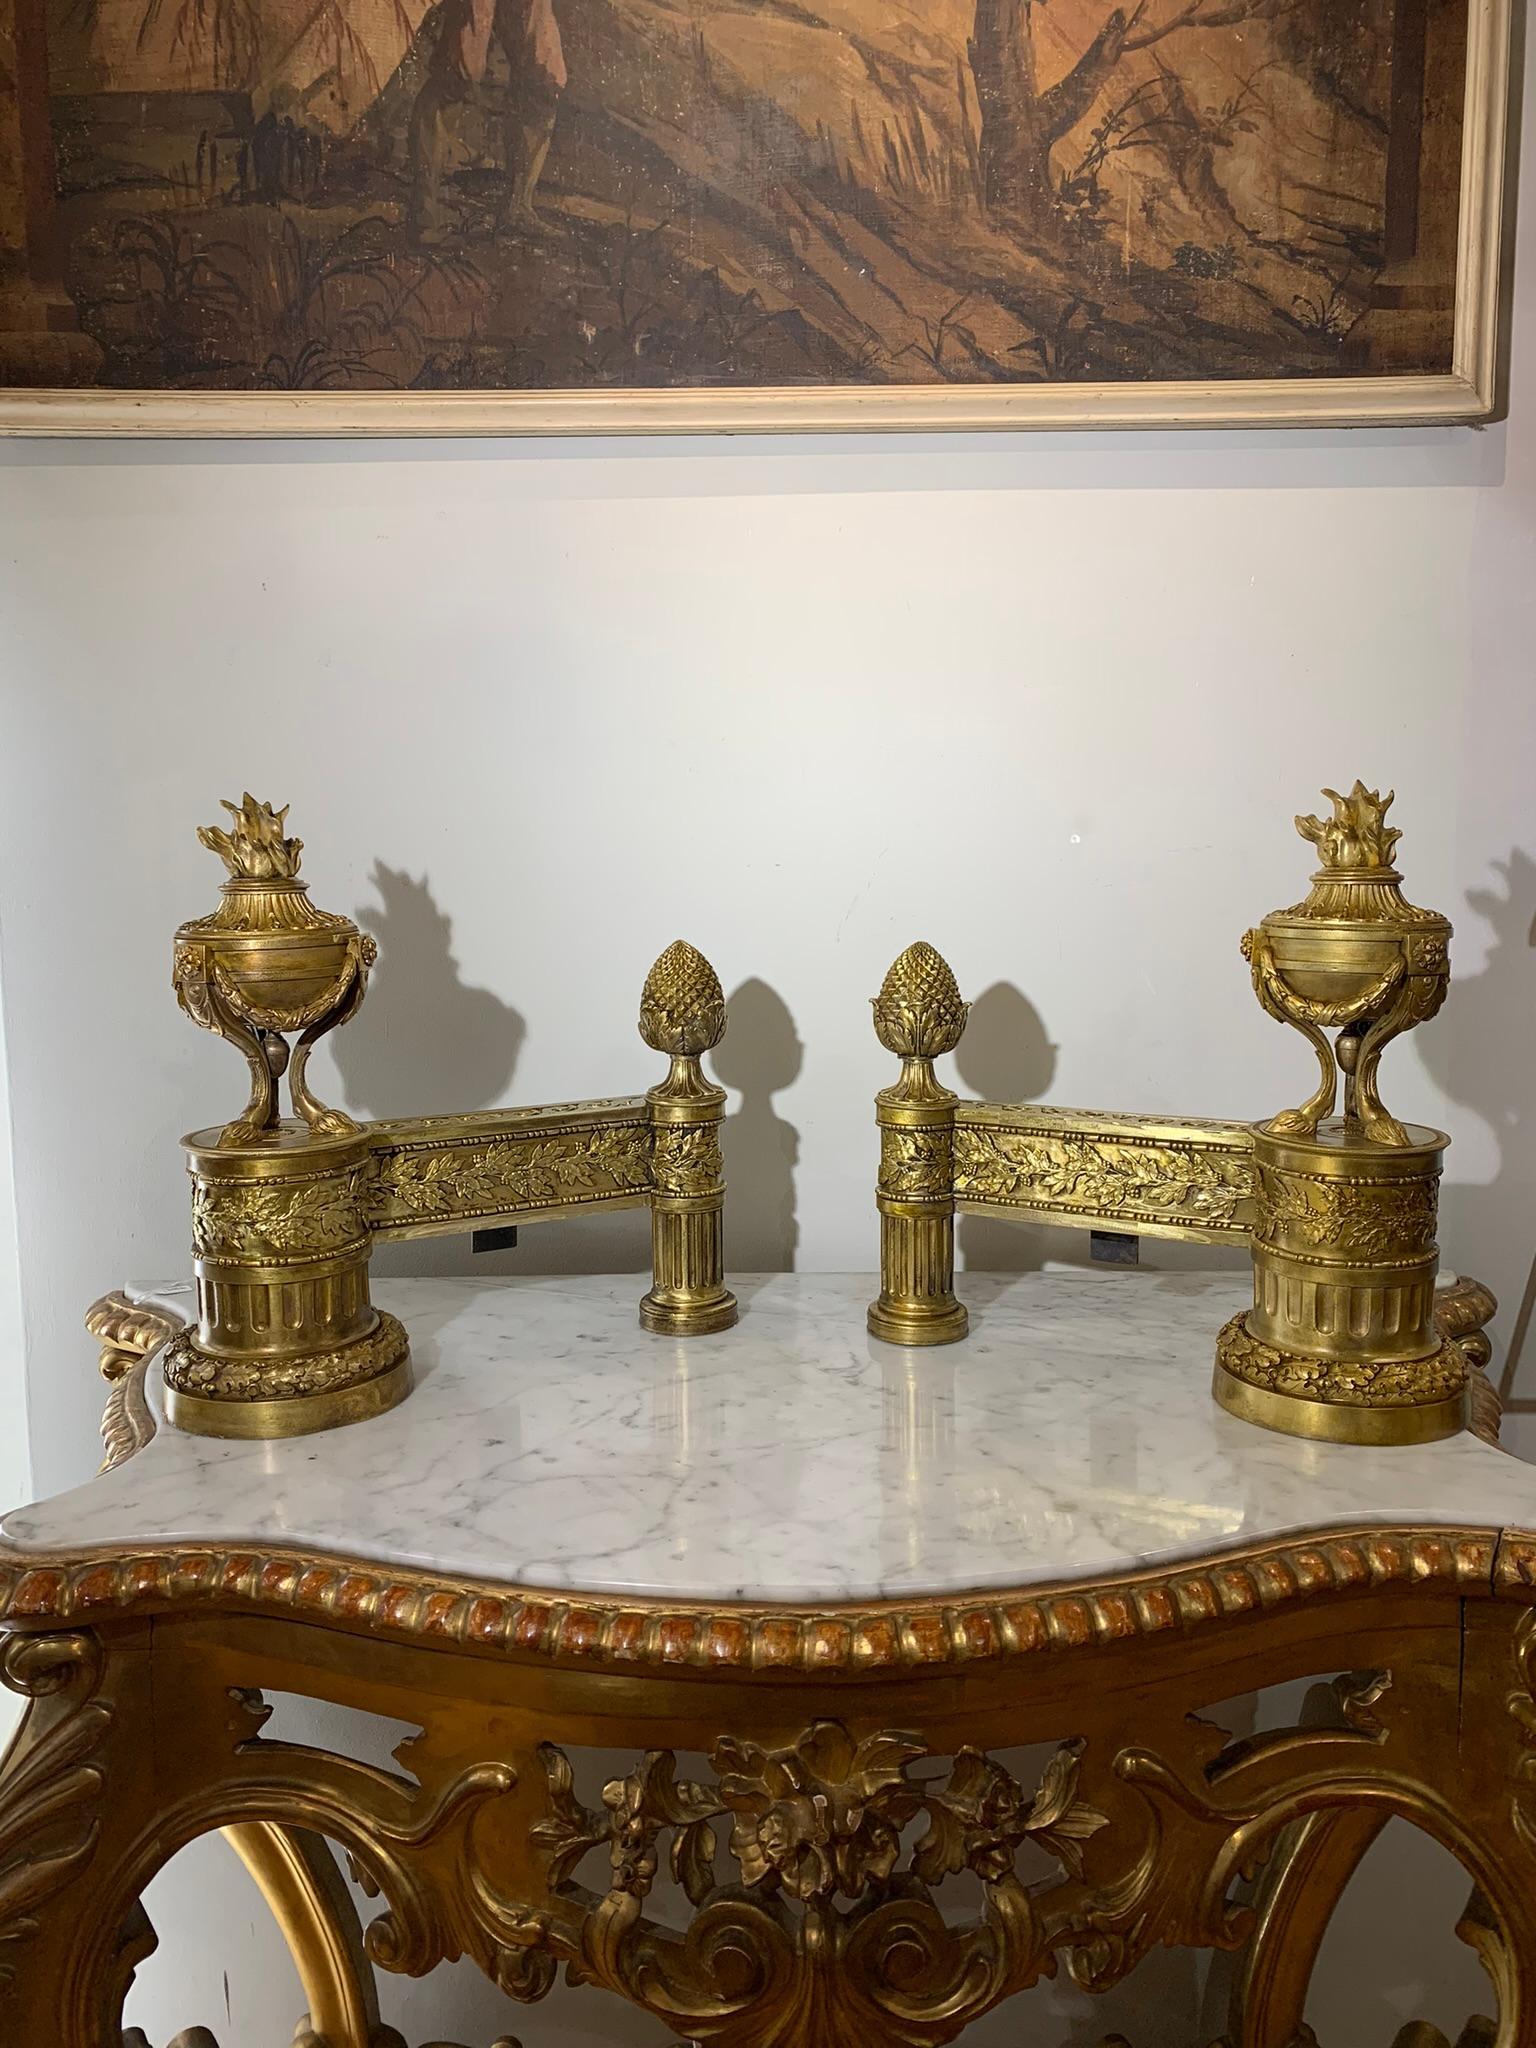 Pair of neoclassical andirons of rare beauty, in lost wax cast bronze, finely chiselled and gilded. Dating back to the end of the 18th century (ca. 1790), they were made with extreme skill by skilled Italian craftsmen. The influence of the